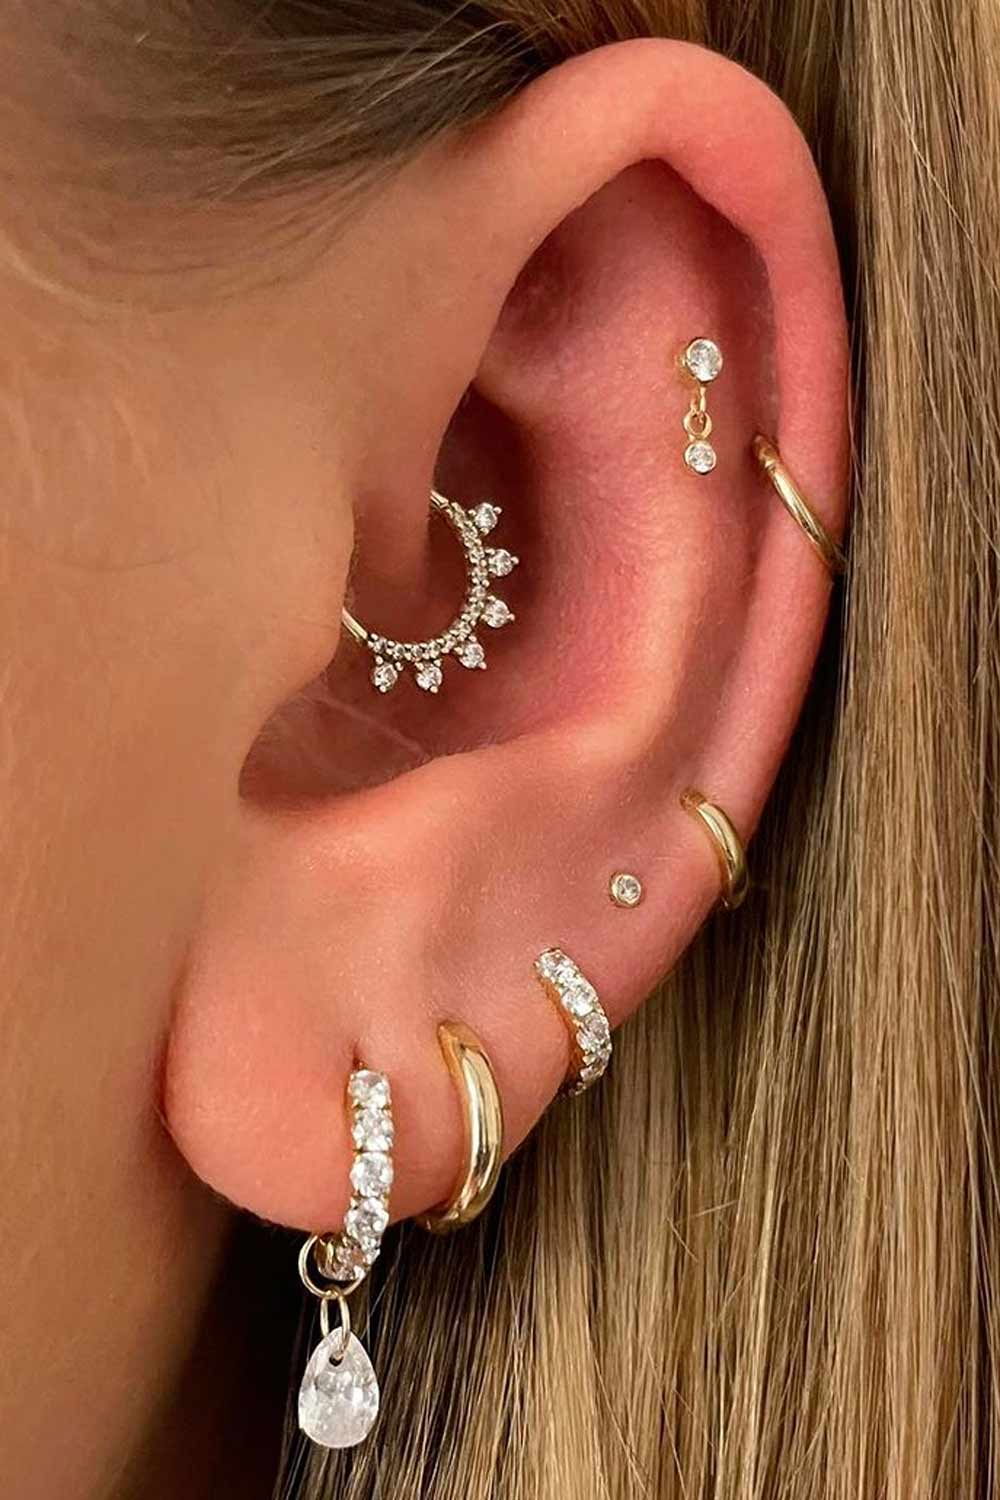 Daith Piercing and All You Need to Know about It